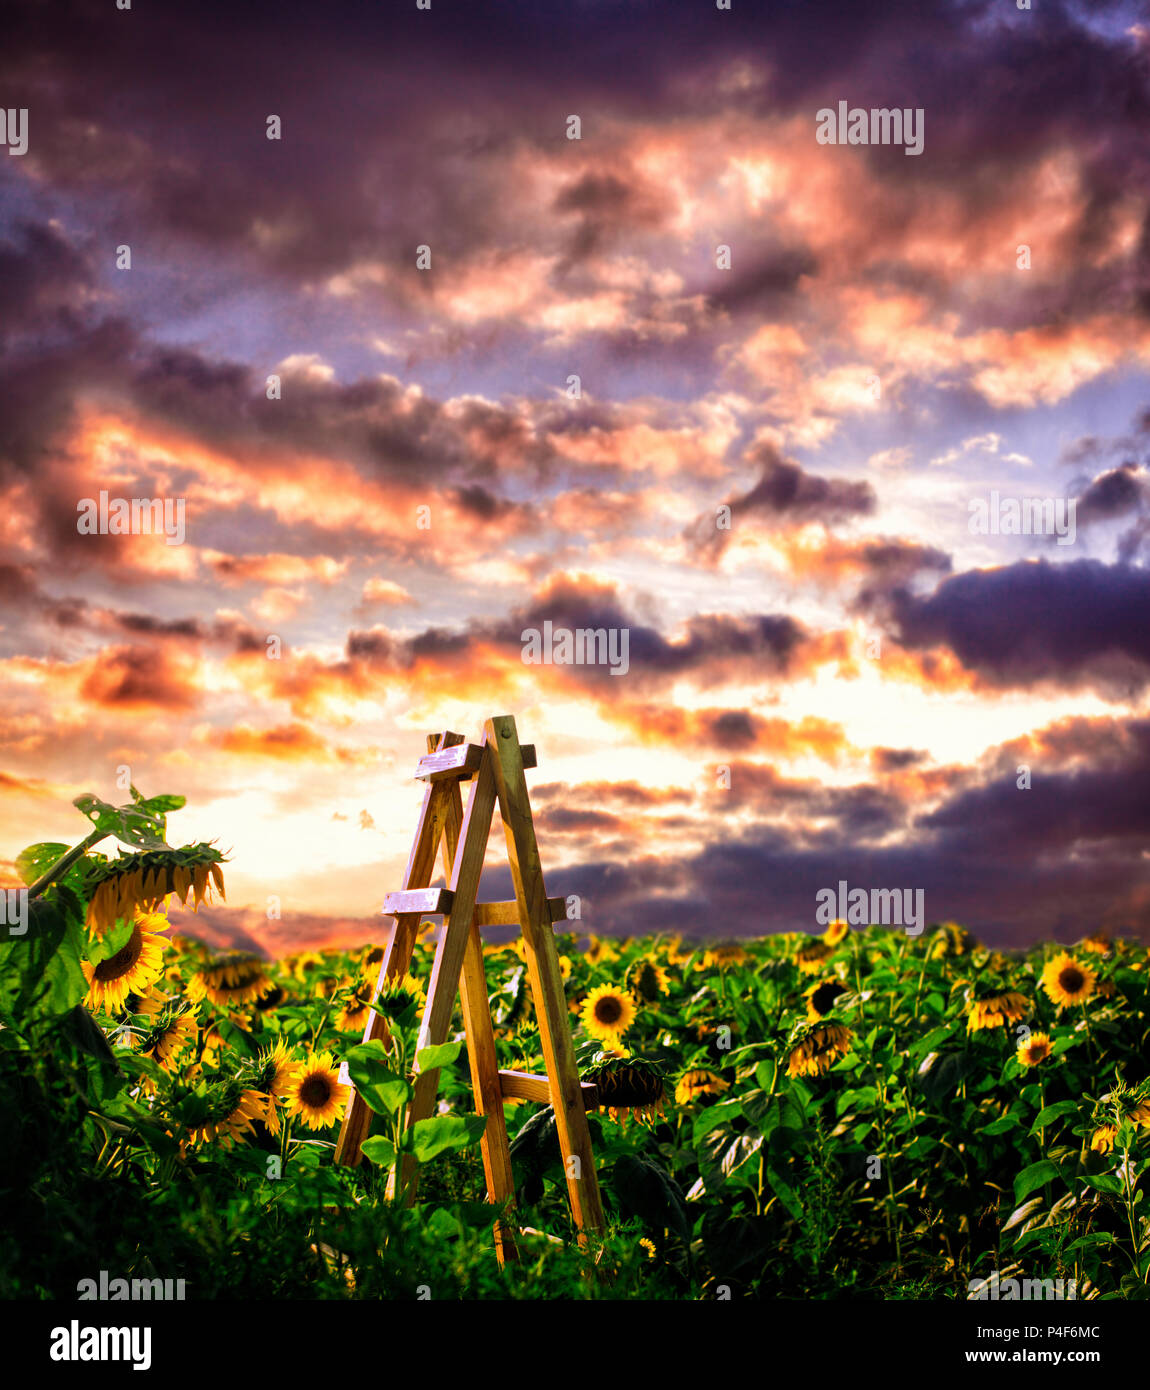 Wooden ladder at the sunflowers field Stock Photo